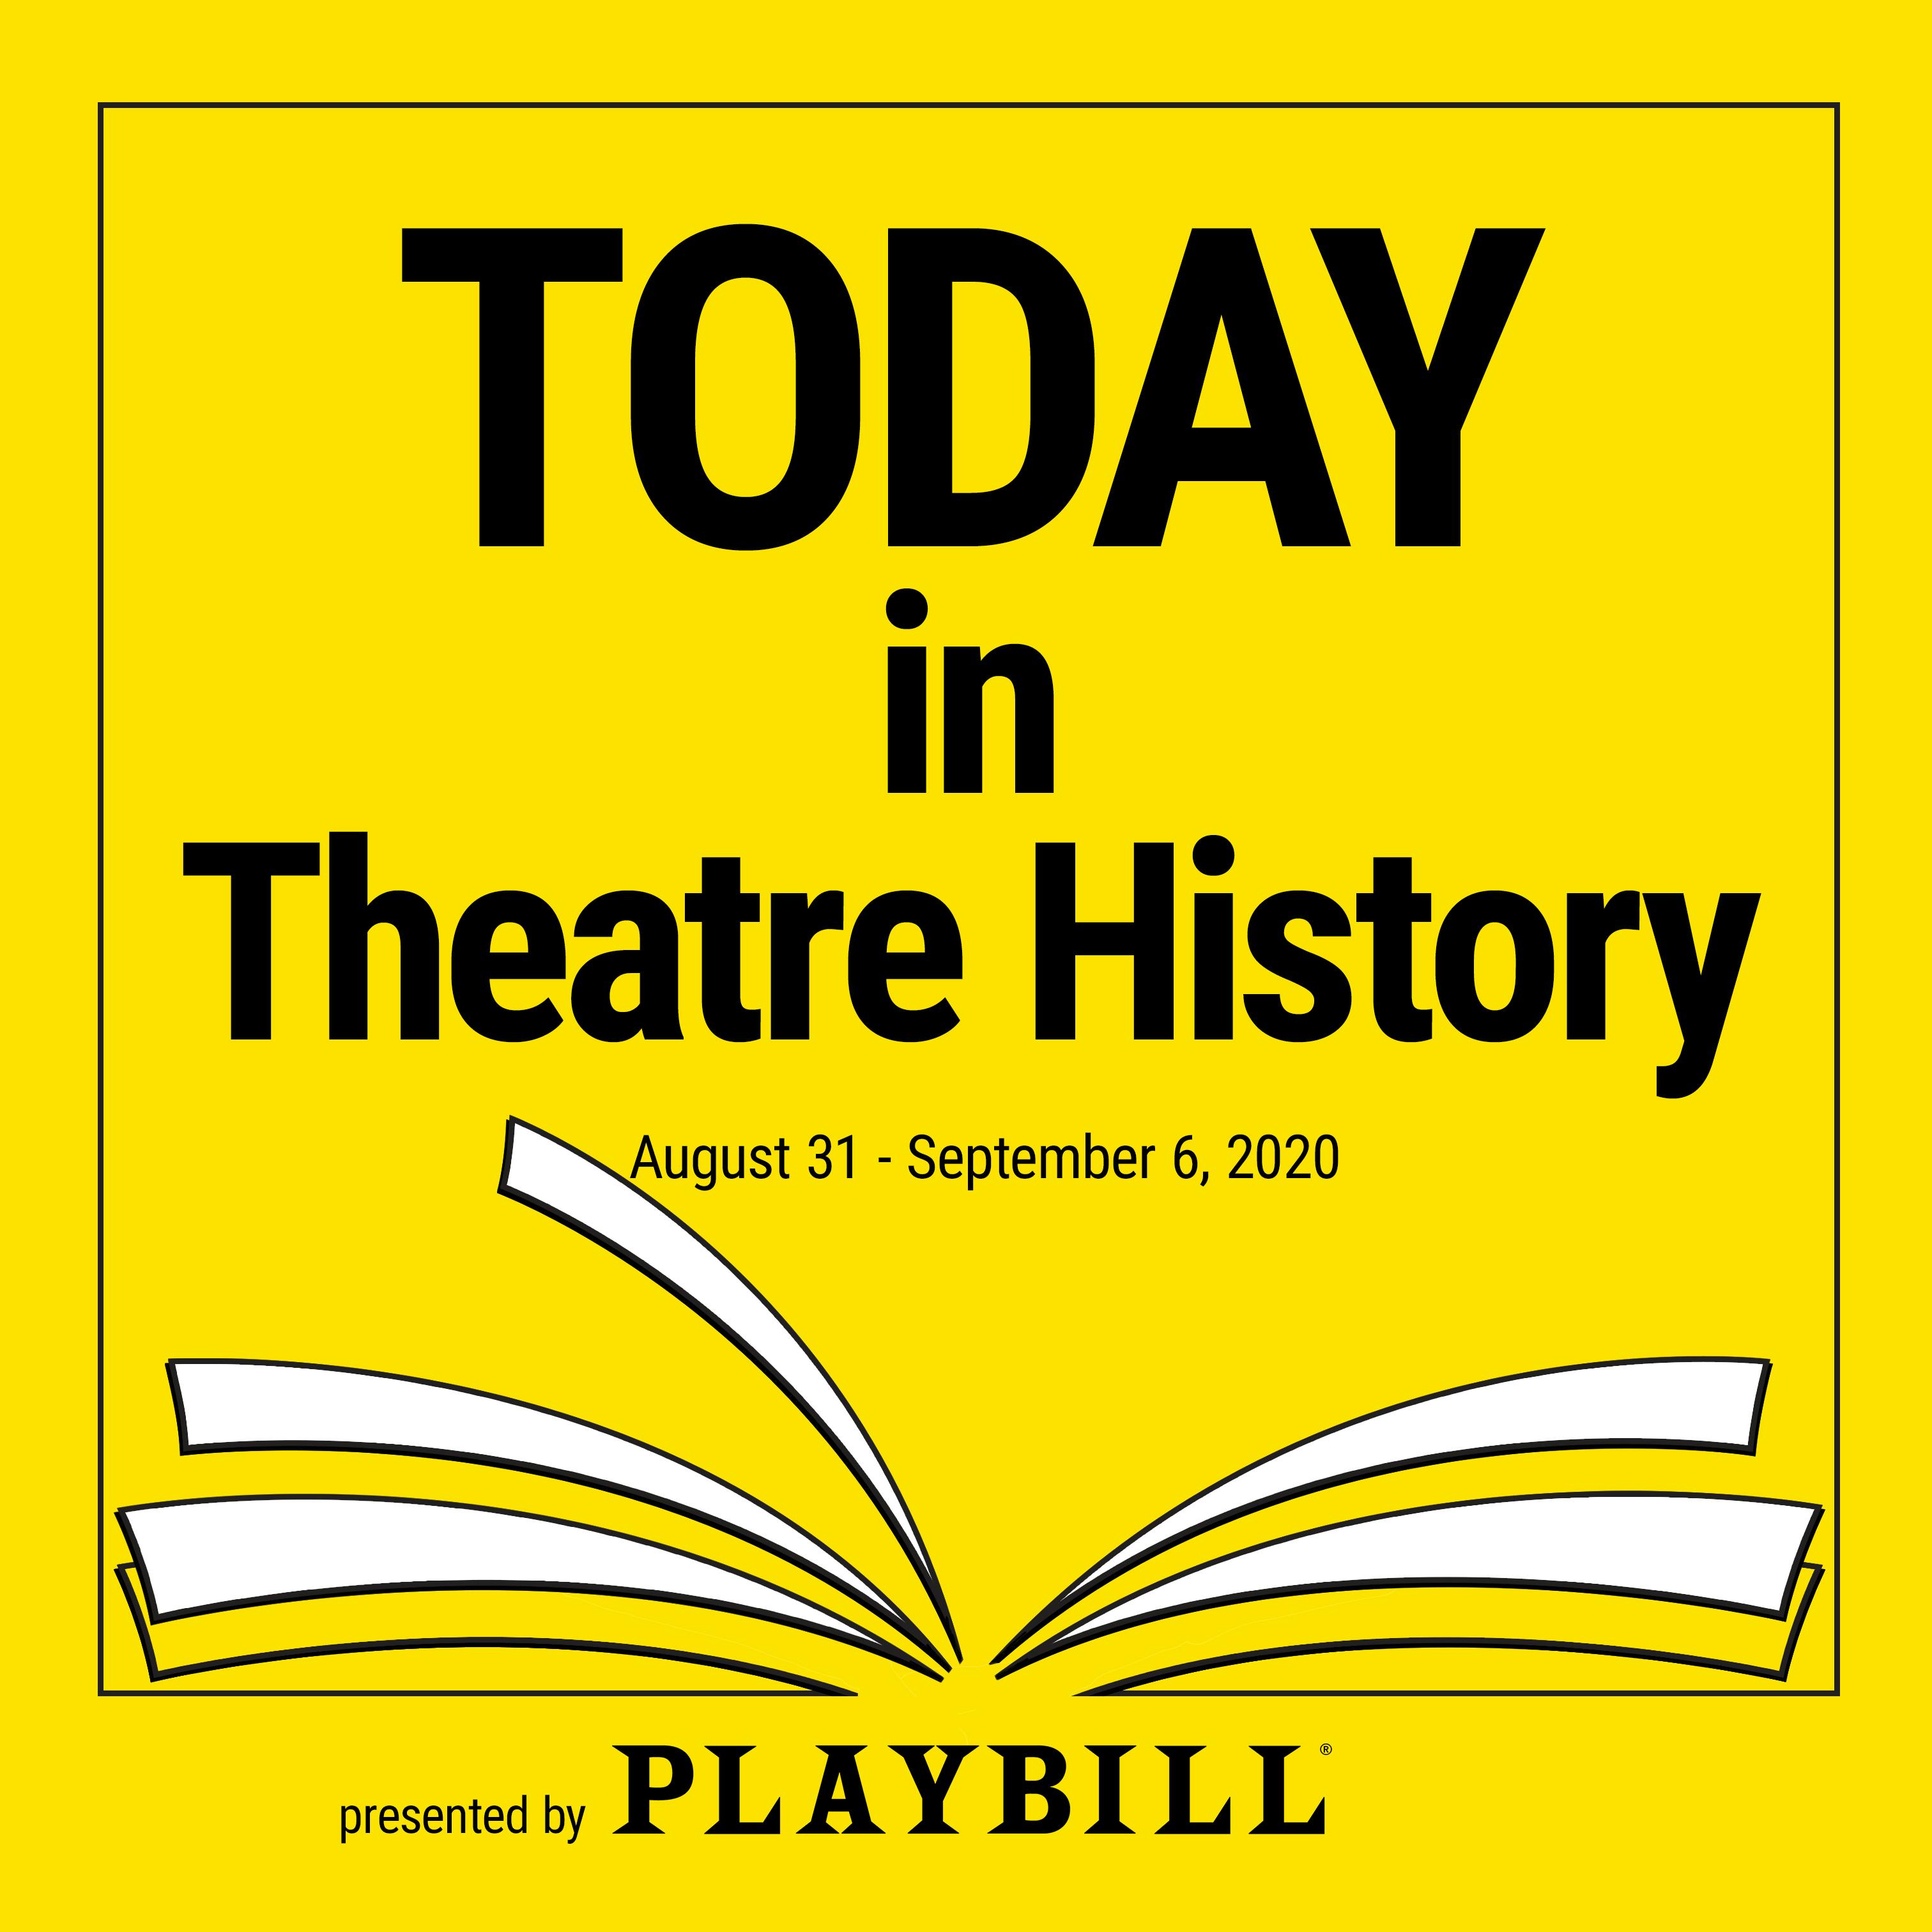 August 31–September 6, 2020: Sophie Tucker gets a black eye, Nathan Lane gets blacklisted, and Follies comes to concert this week in theatre history!